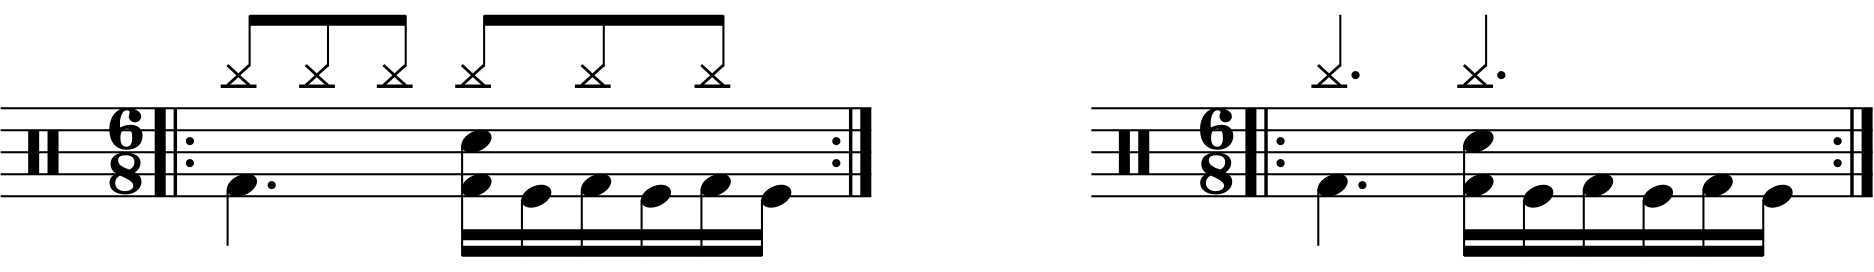 A 6/8 groove with sixteenth note kicks.